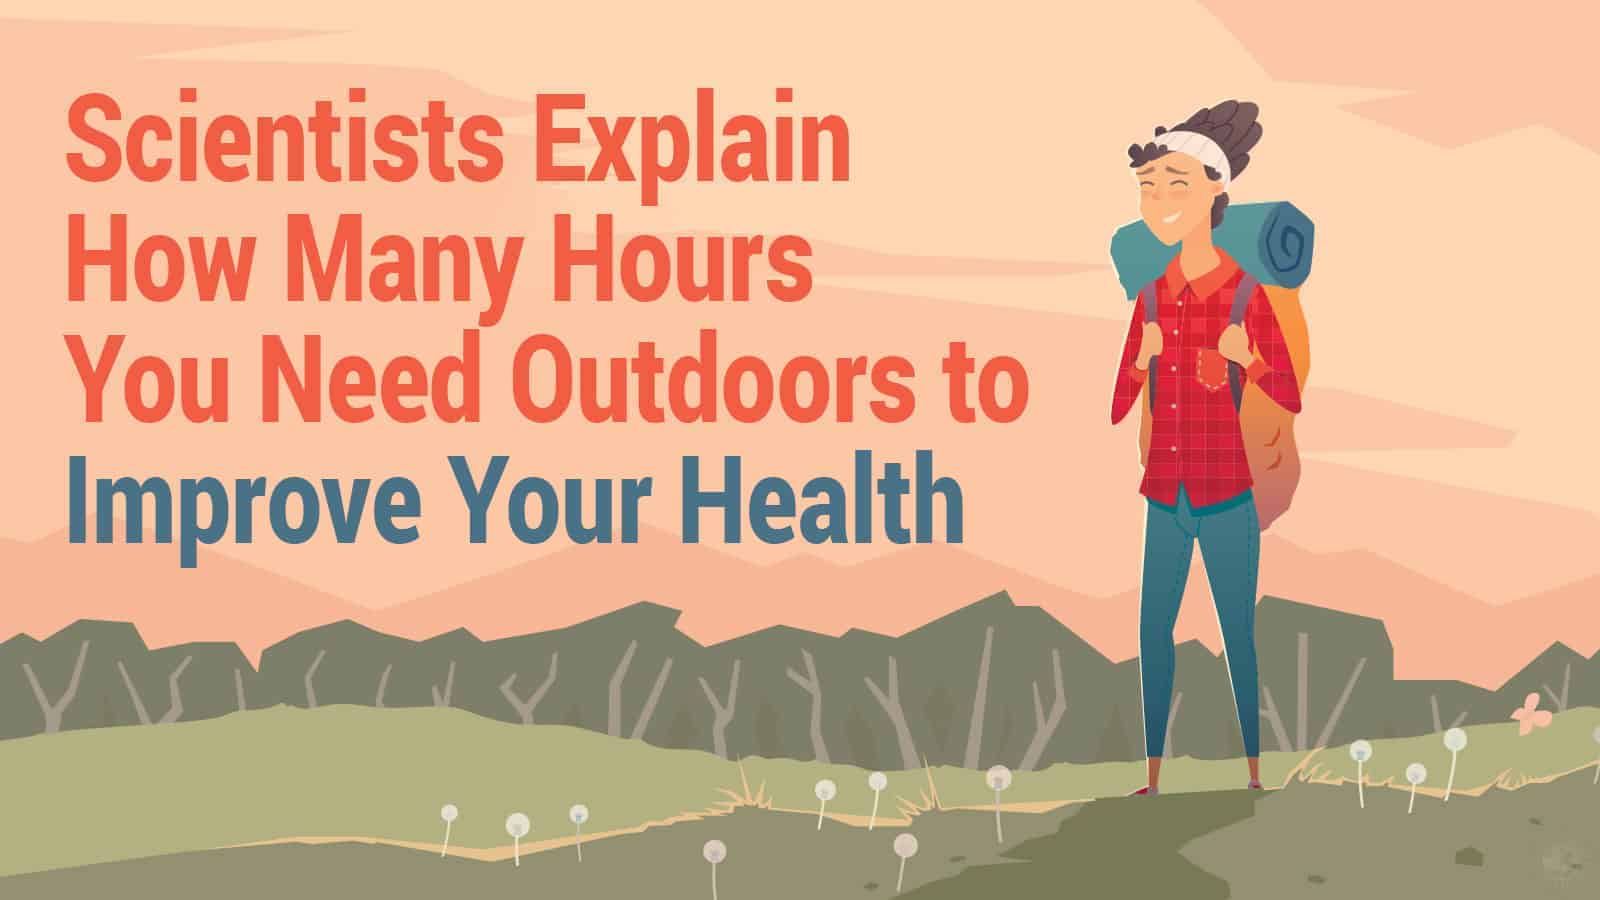 Scientists Explain How Many Hours You Need Outdoors to Improve Your Health